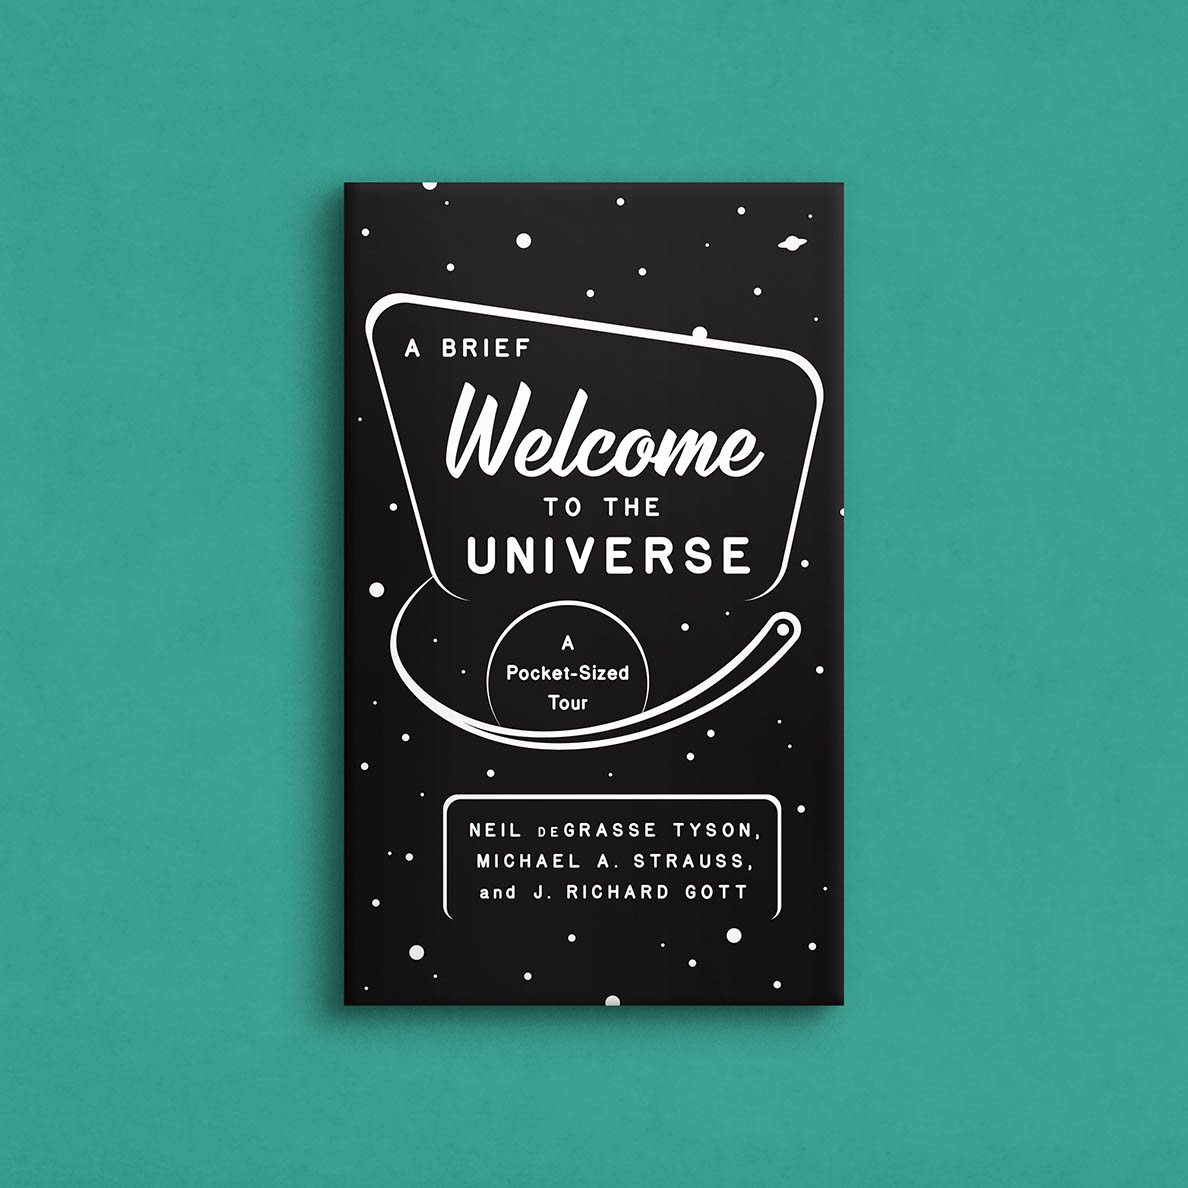 A Brief Welcome to the Universe book cover